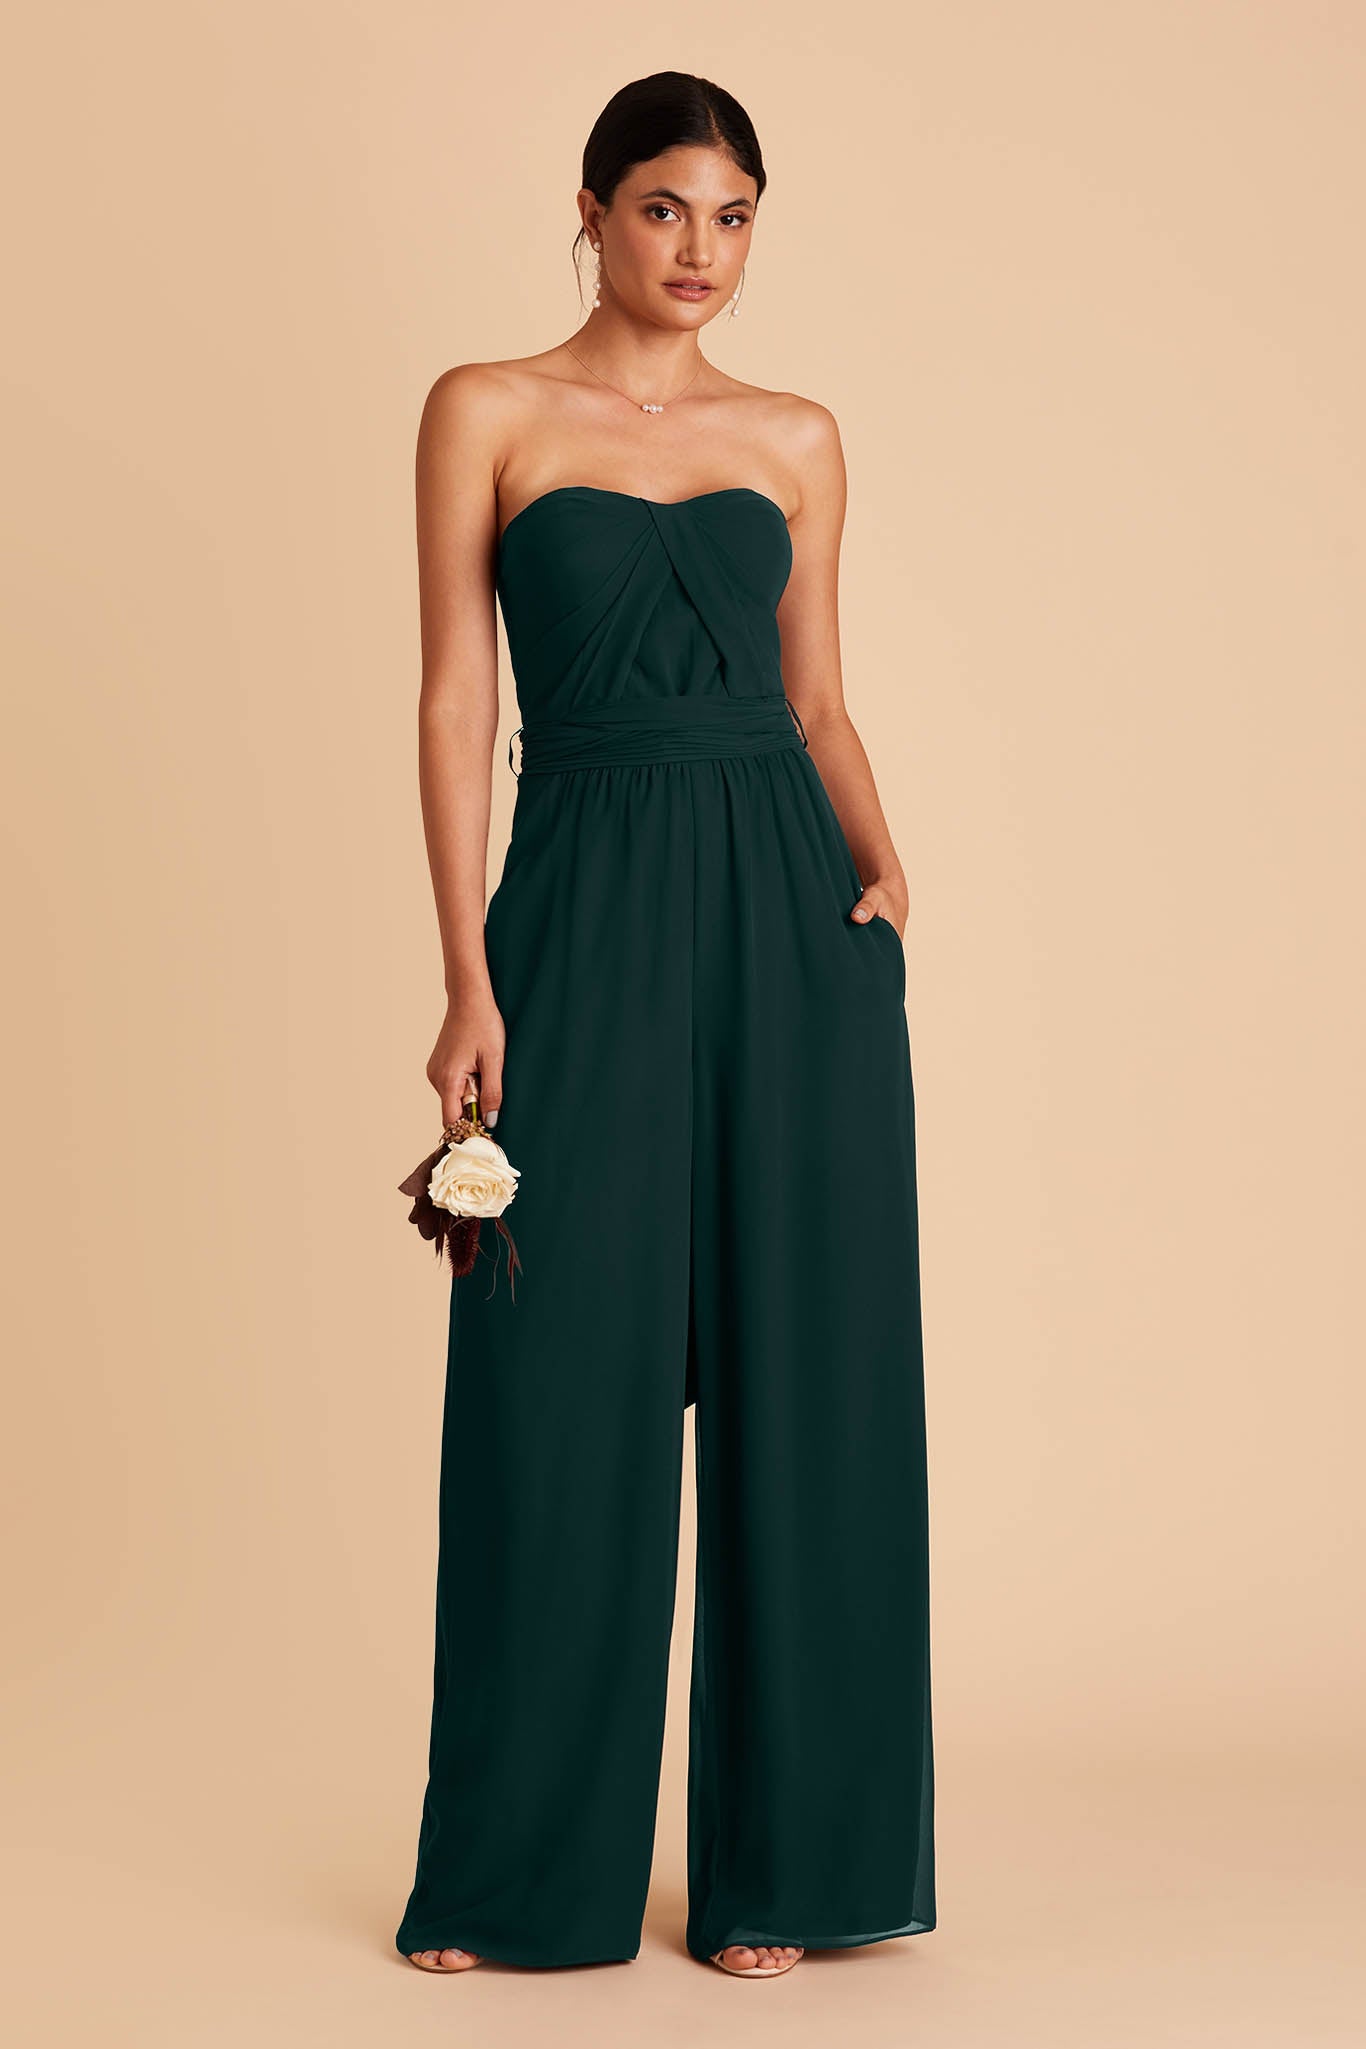 Dark green wedding jumpsuit with sweetheart bodice with convertible neckline